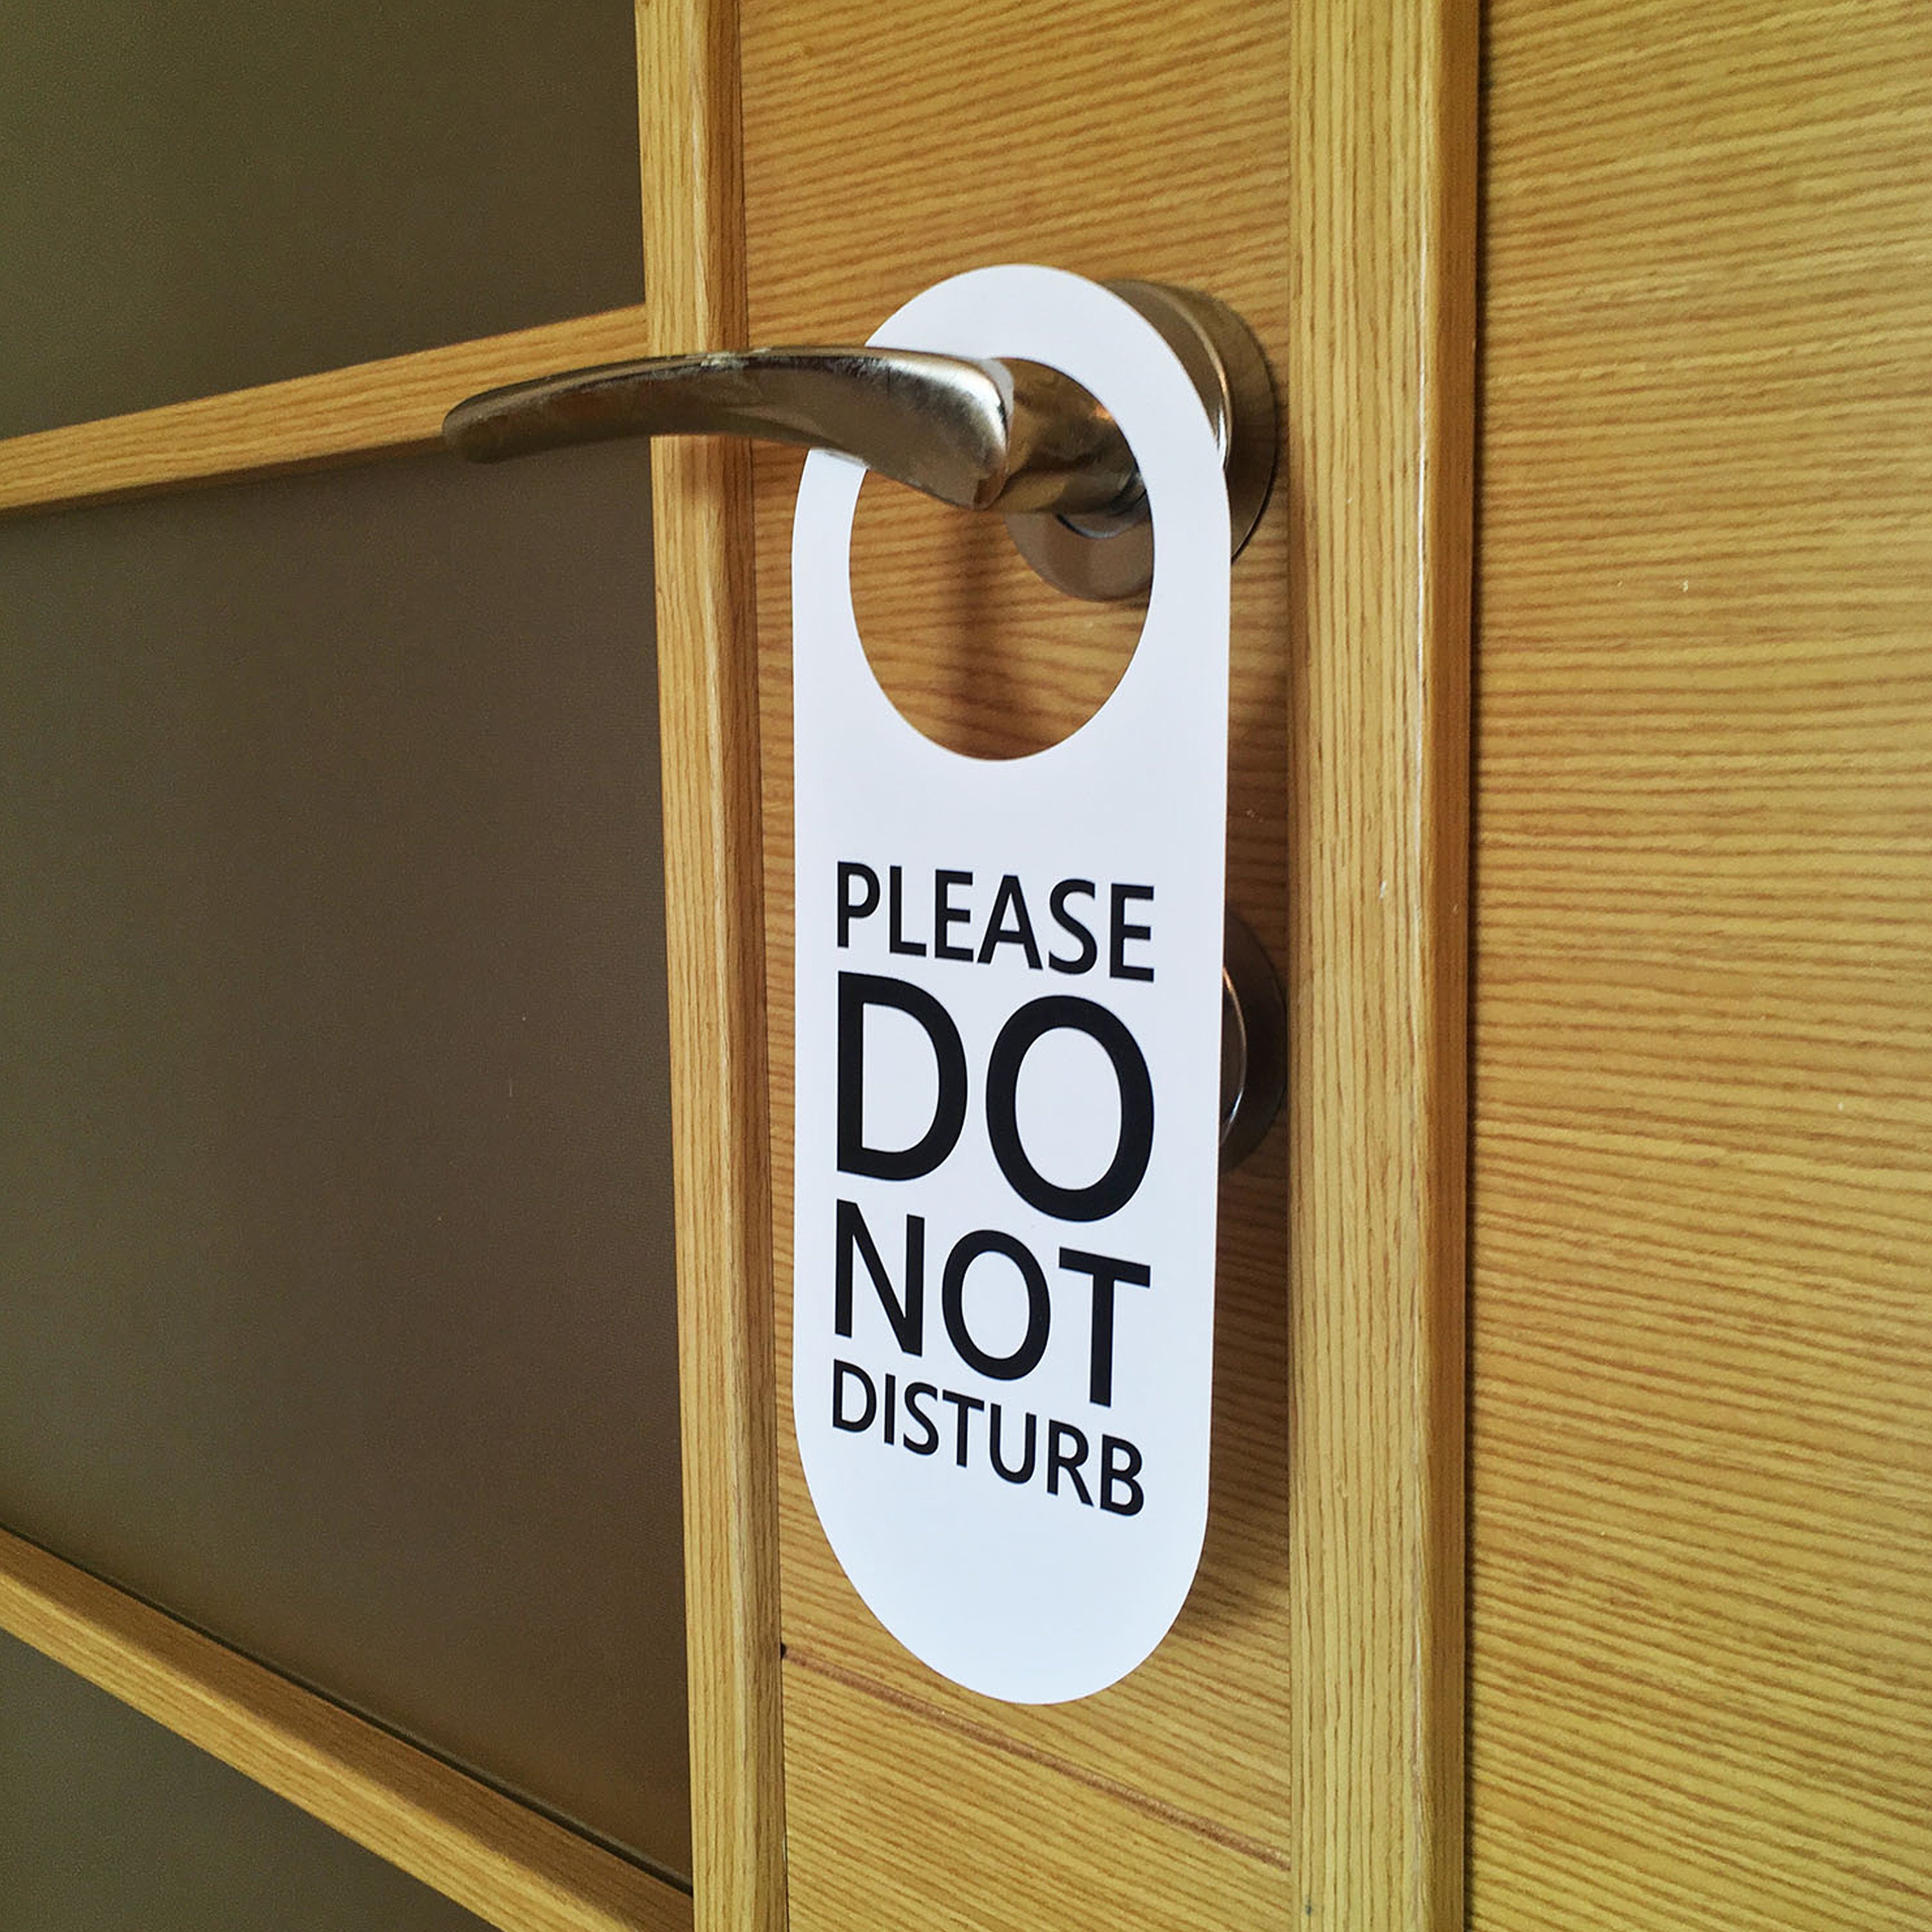 Do Not Disturb Door Hanger Sign 2 Pack (Black and White, Double Sided)  Please Do Not